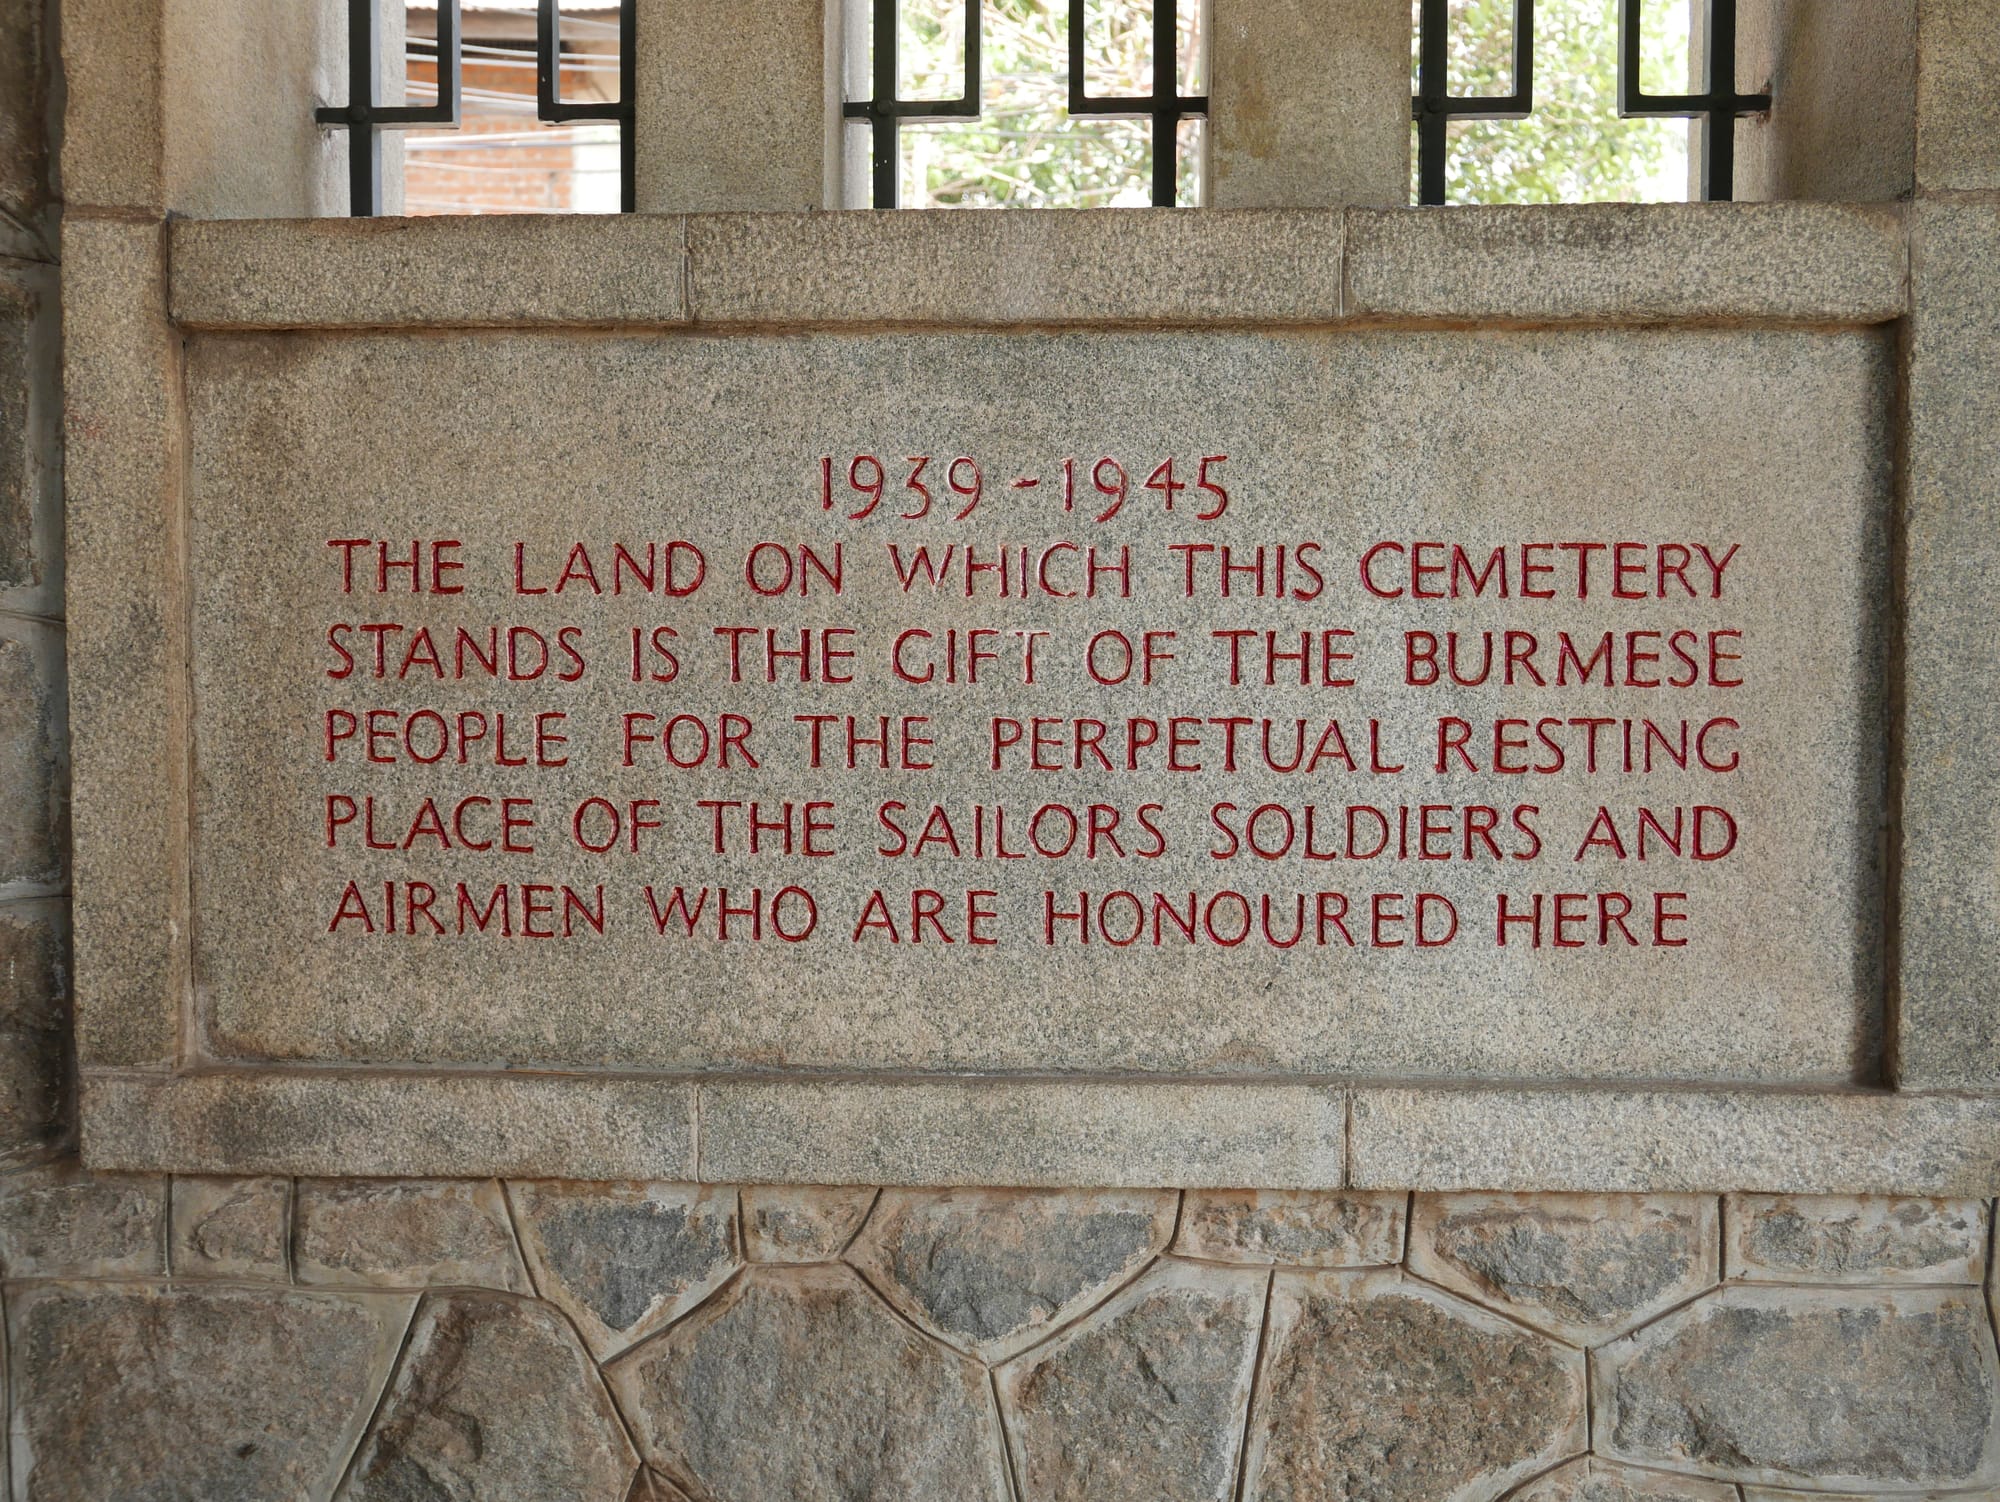 Photo by Author — plaque inside the main entrance to Rangoon War Cemetery